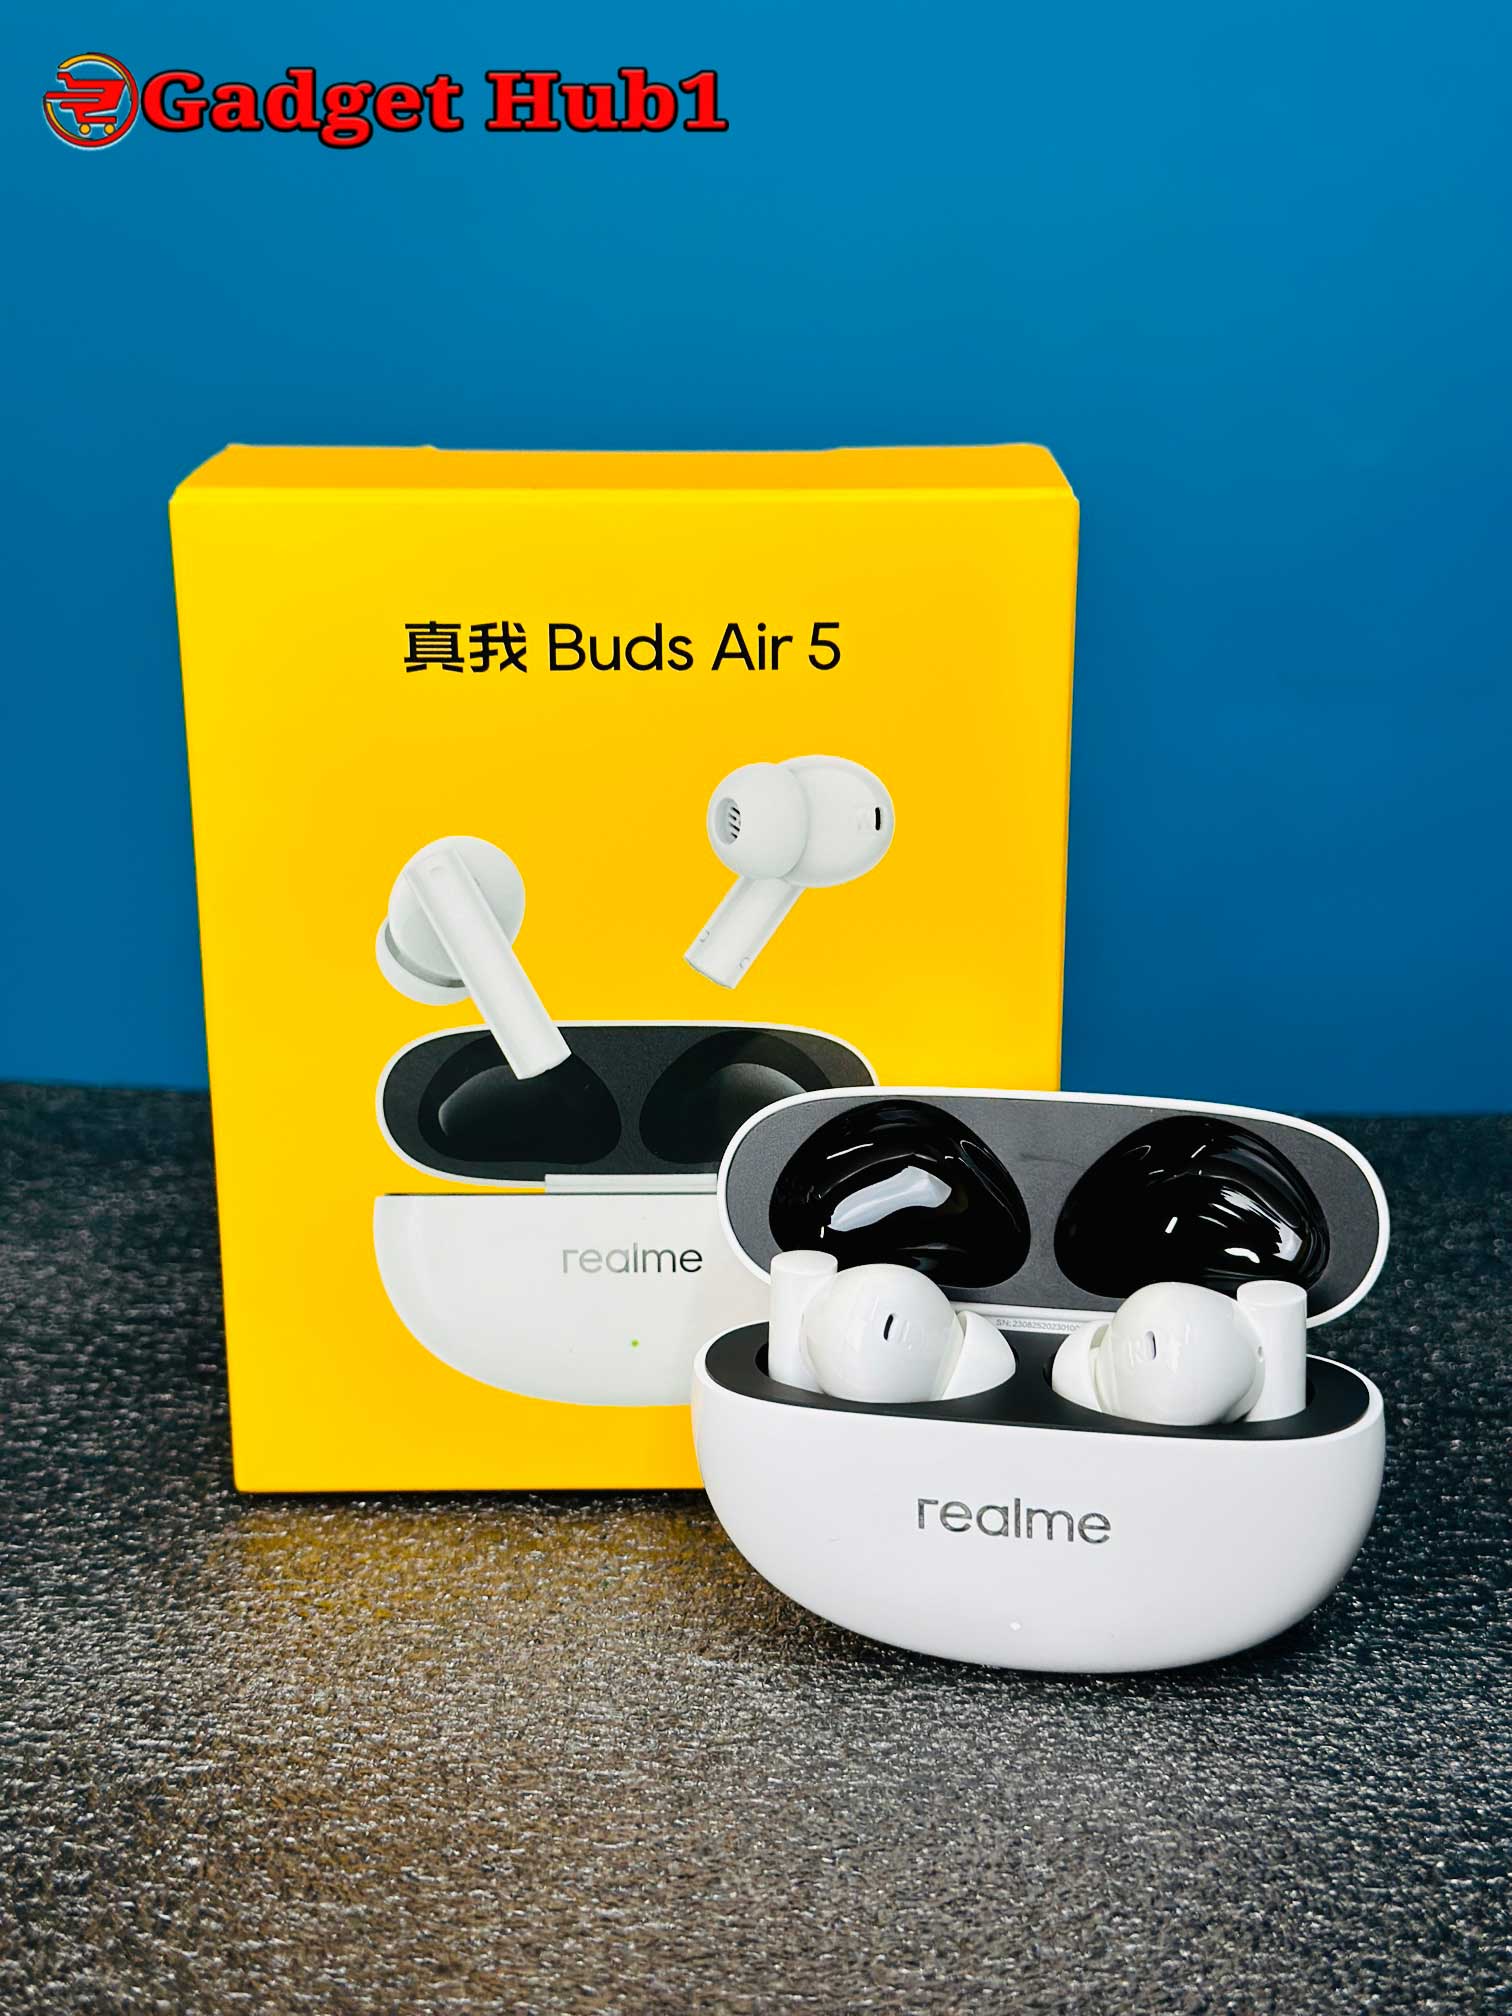 Realme Buds Air 5 Active Noise Canceling True Wireless Earbuds Blue & White Color